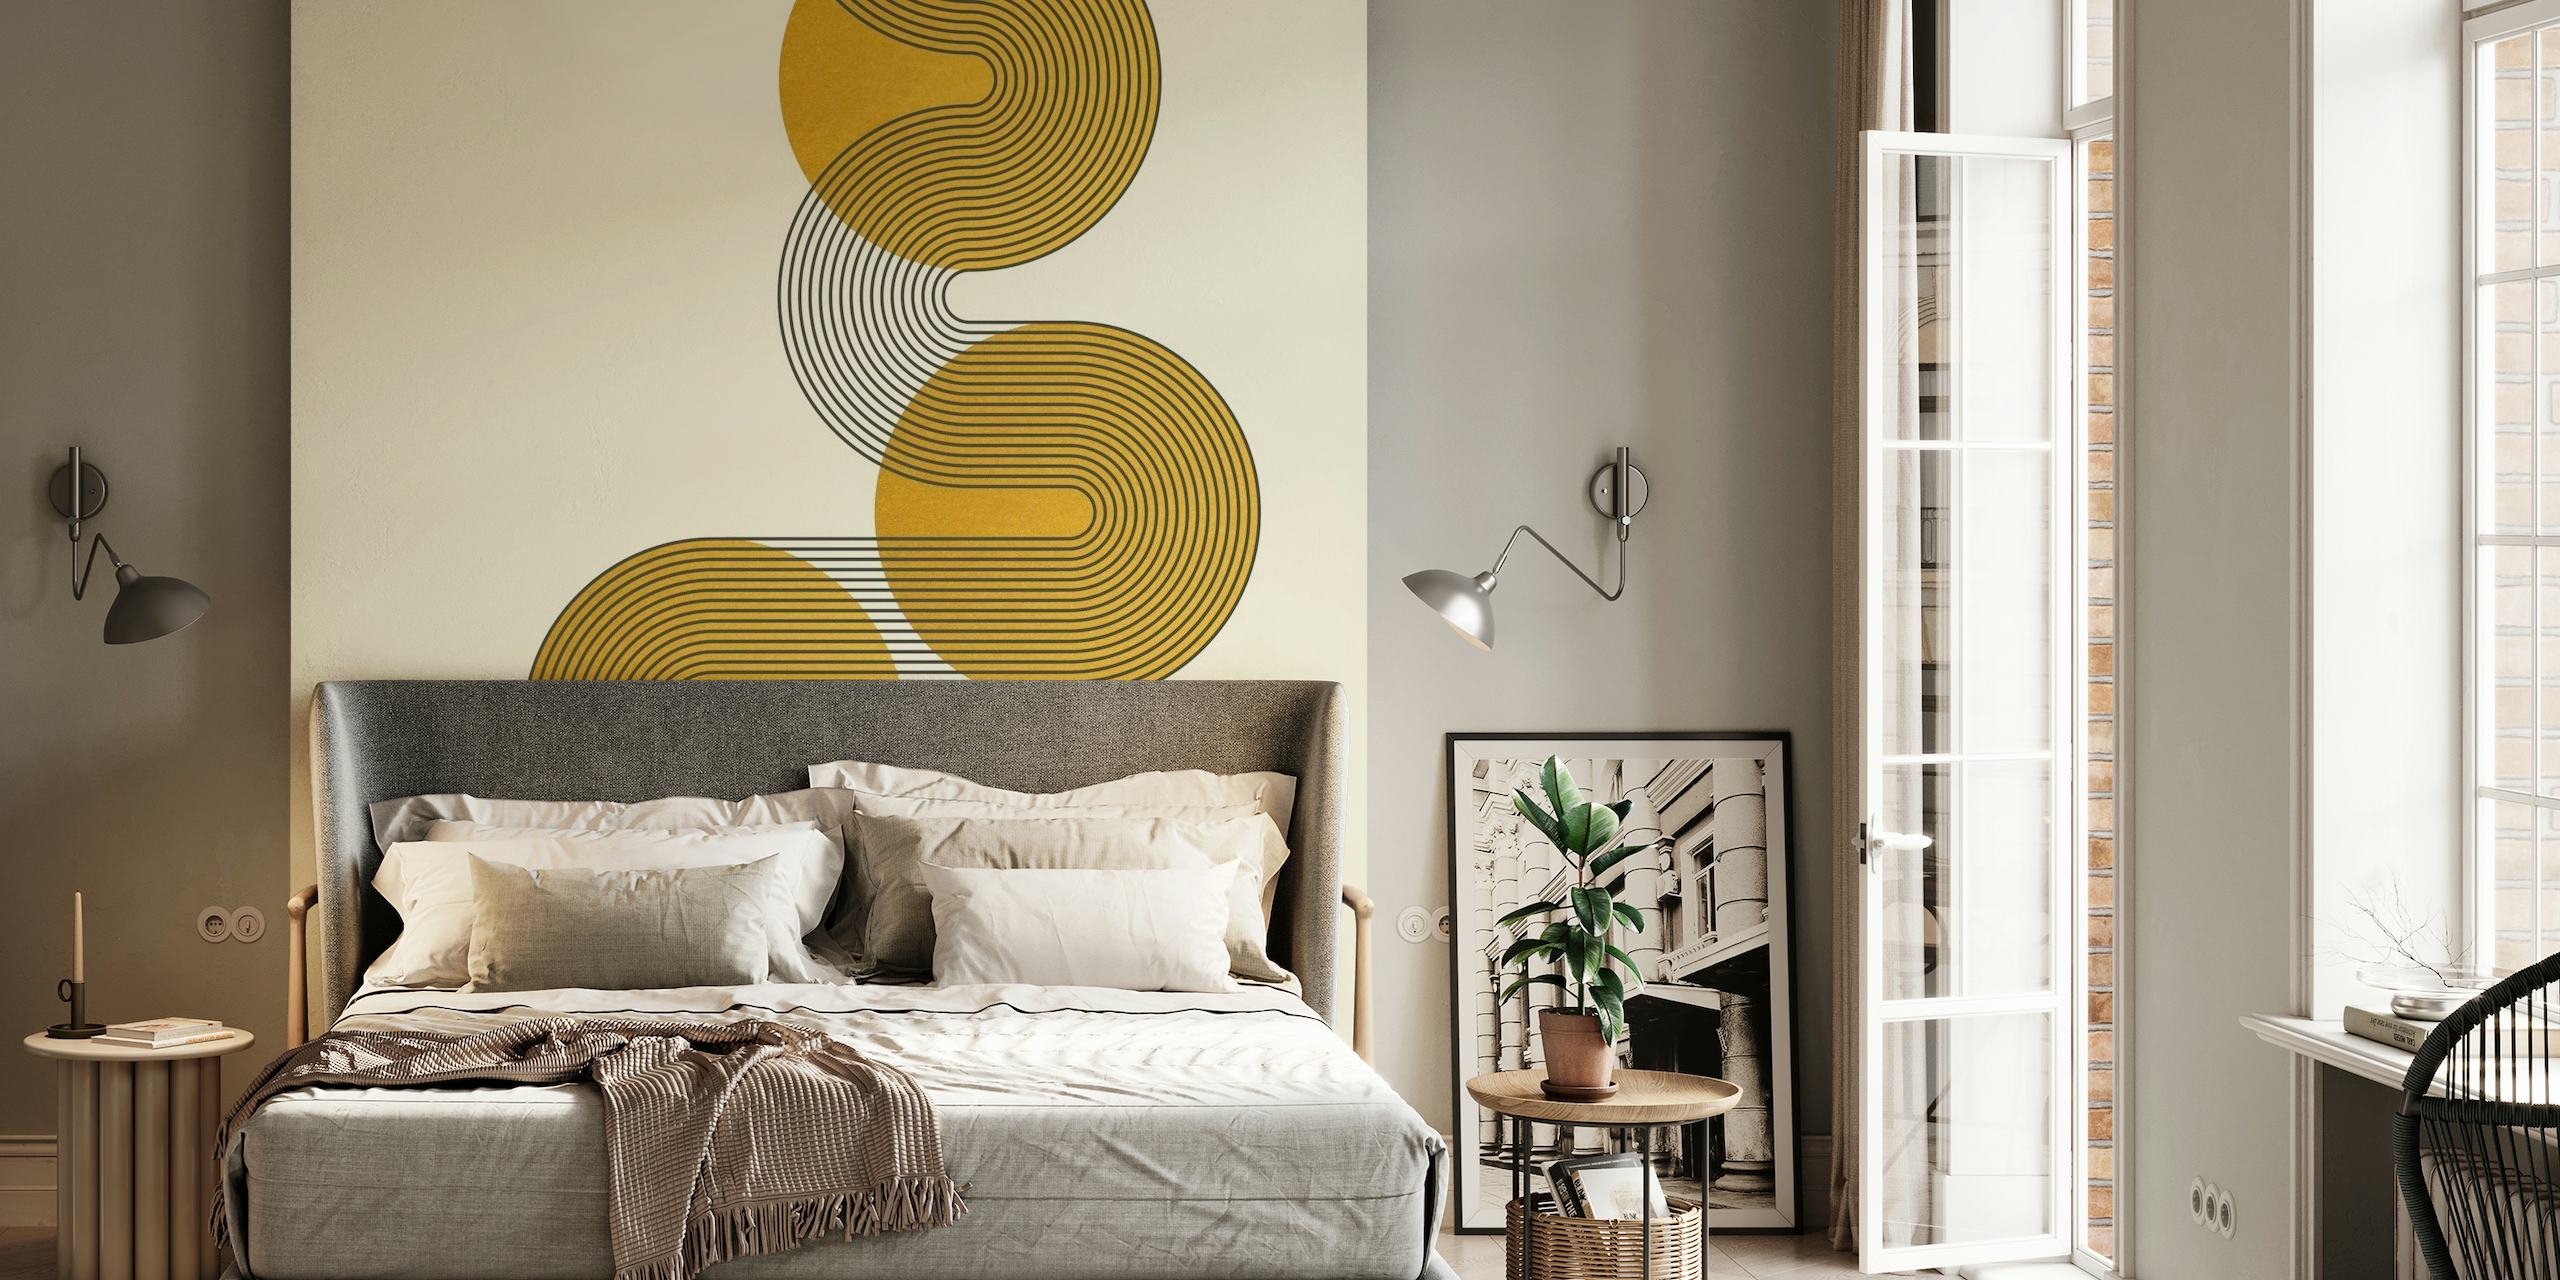 Abstract Curvy Bauhaus-inspired Wall Mural in Sunrise Tones